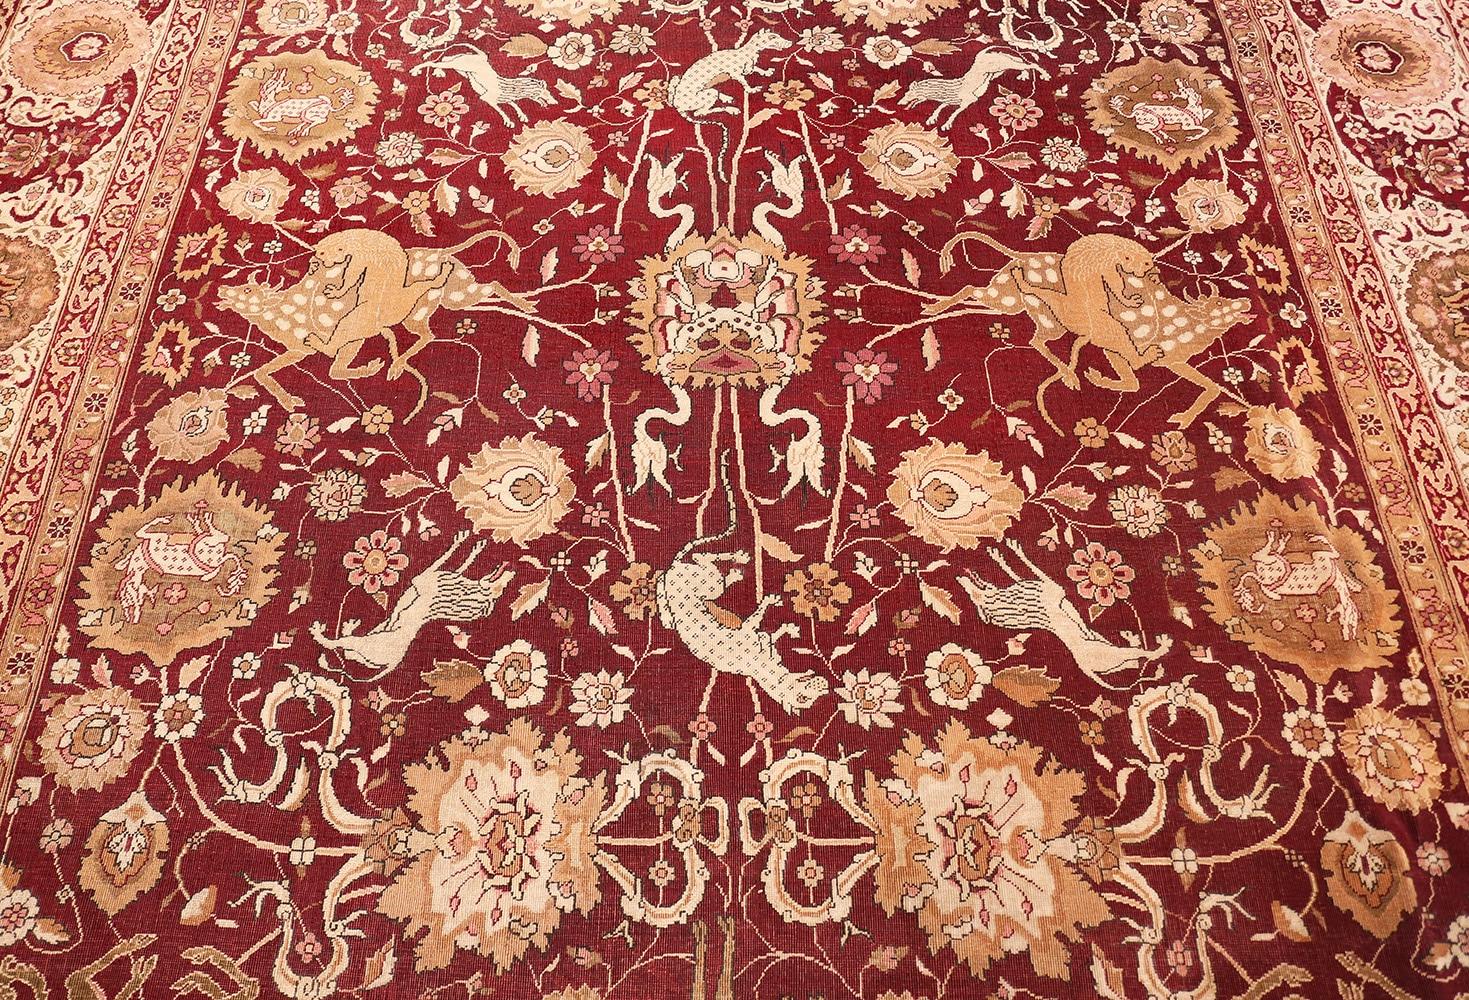 Animal Patterned Room Sized Antique Indian Agra Rug. Size: 10 ft x 13 ft 8 in 5